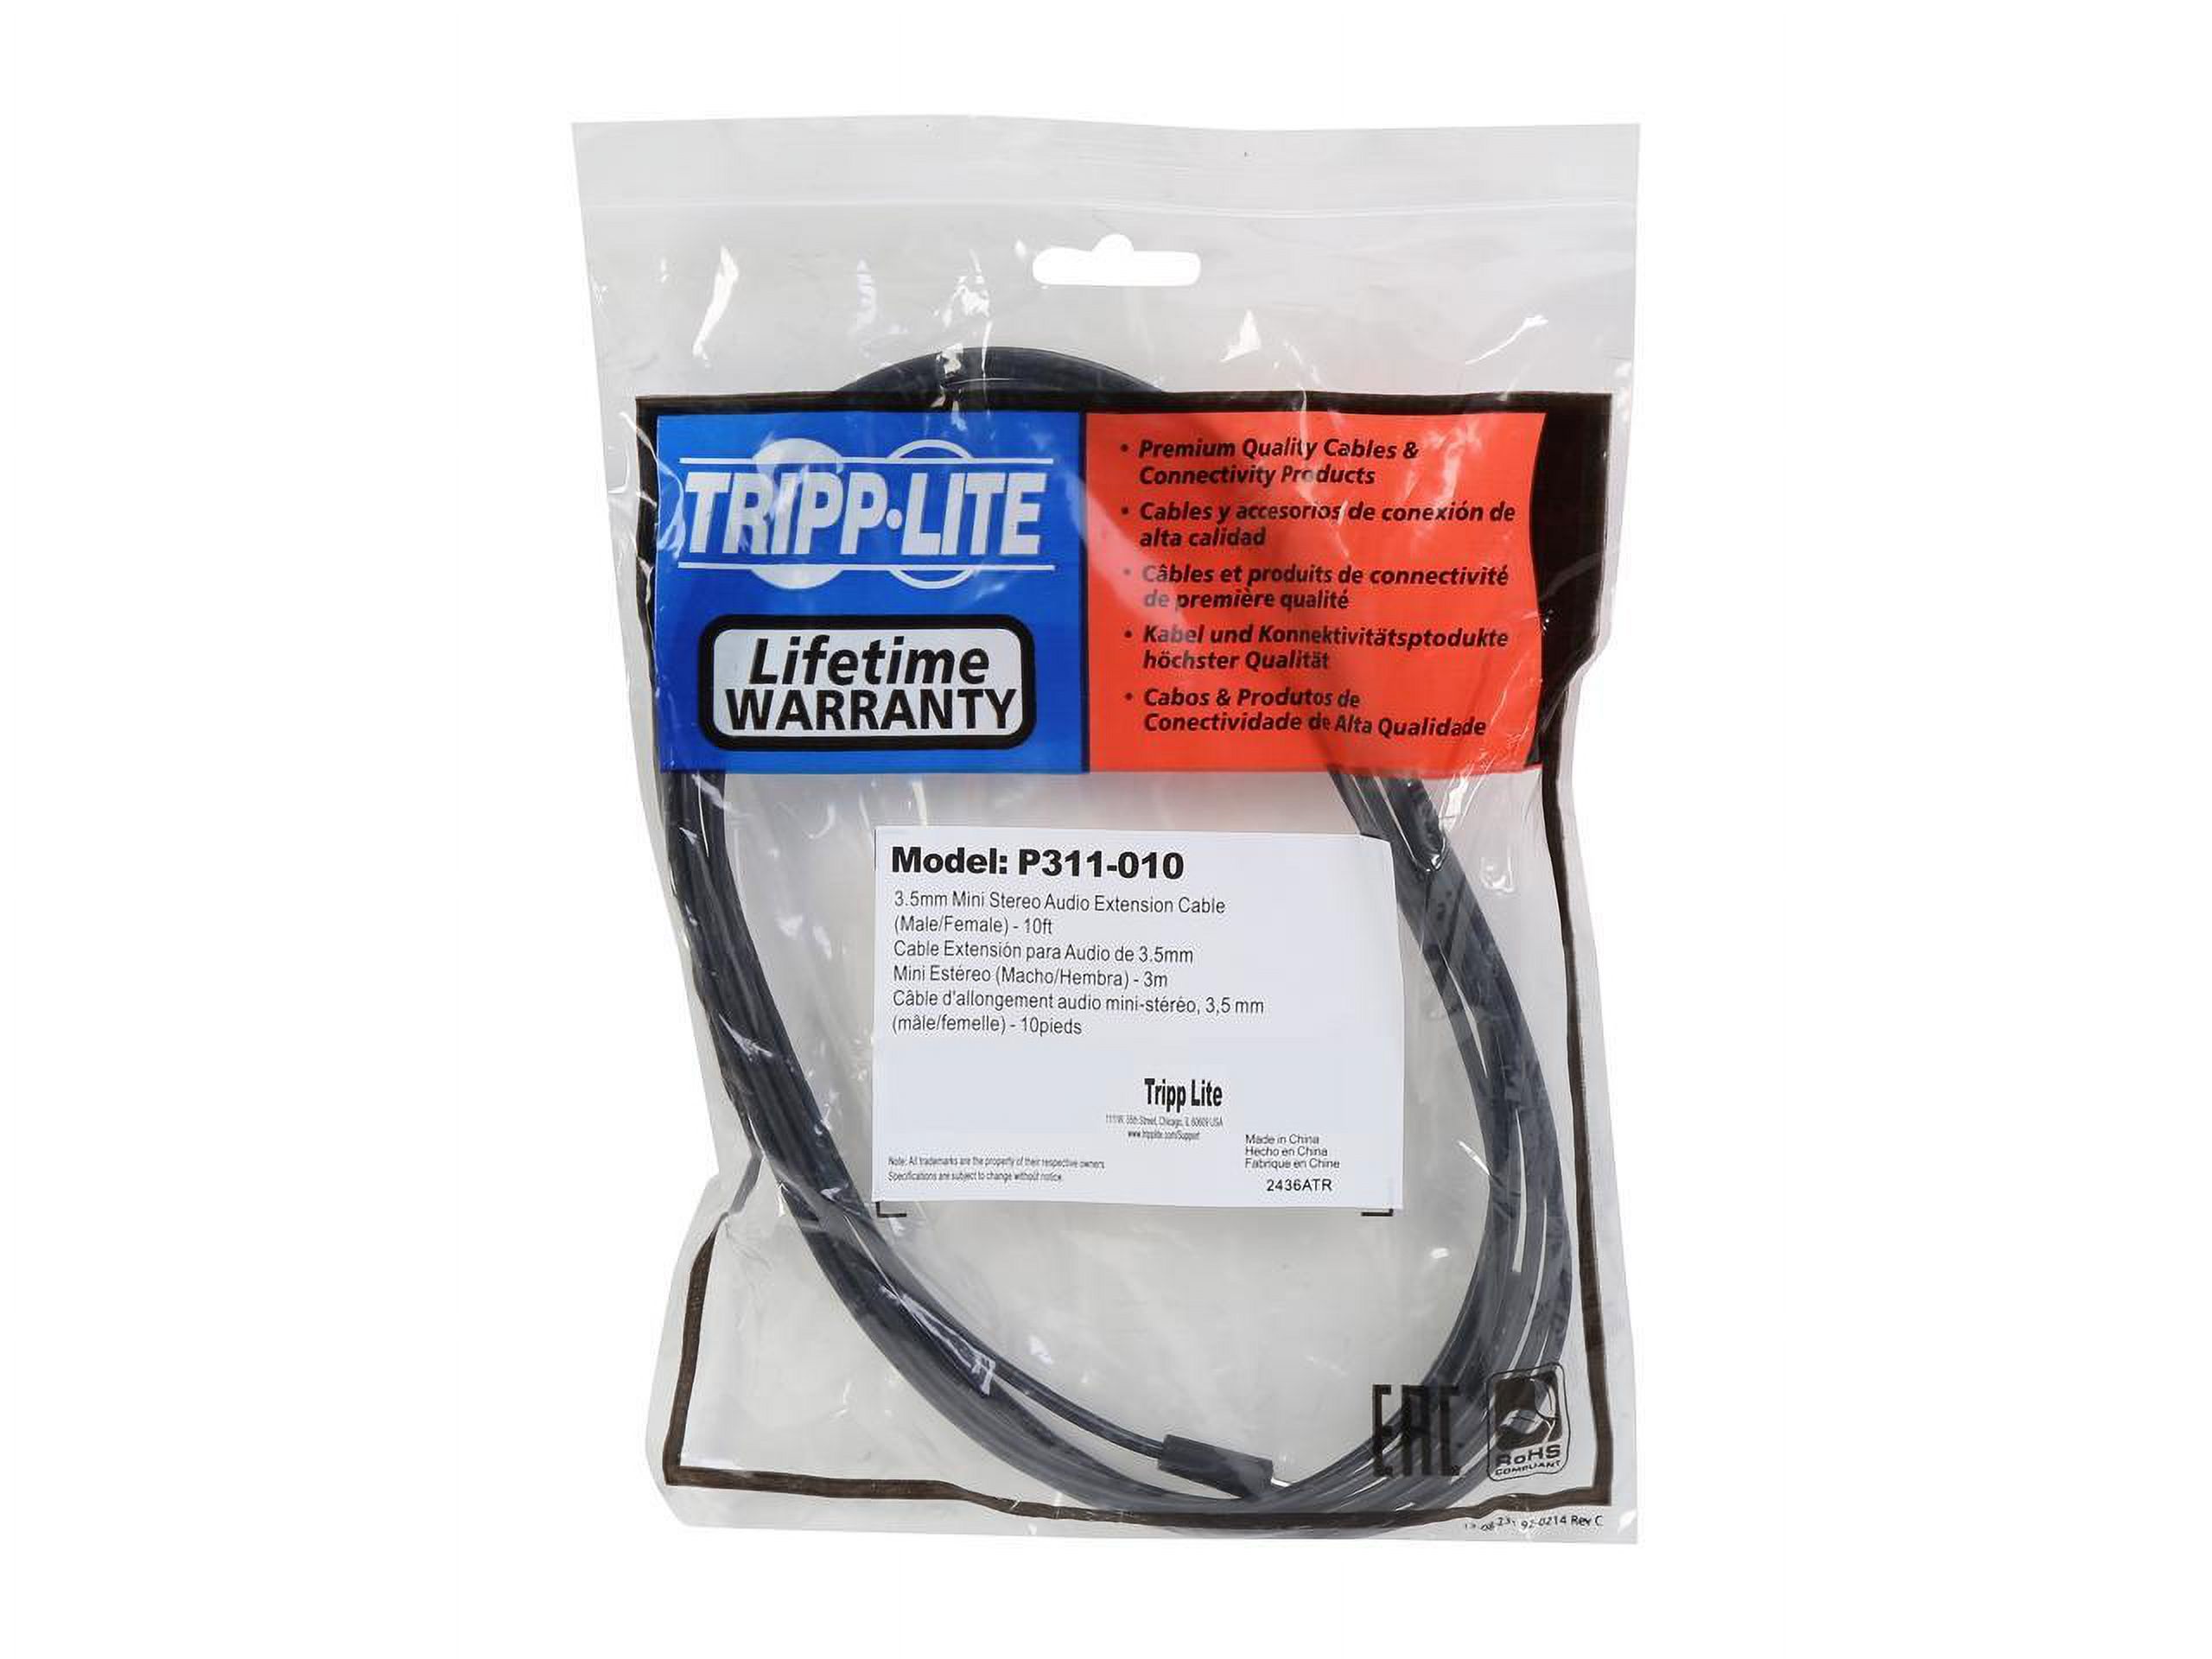 Tripp Lite P311-010 10 ft. (3m) 3.5mm M/F Mini-Stereo Audio Extension Cable Male to Female - image 3 of 3